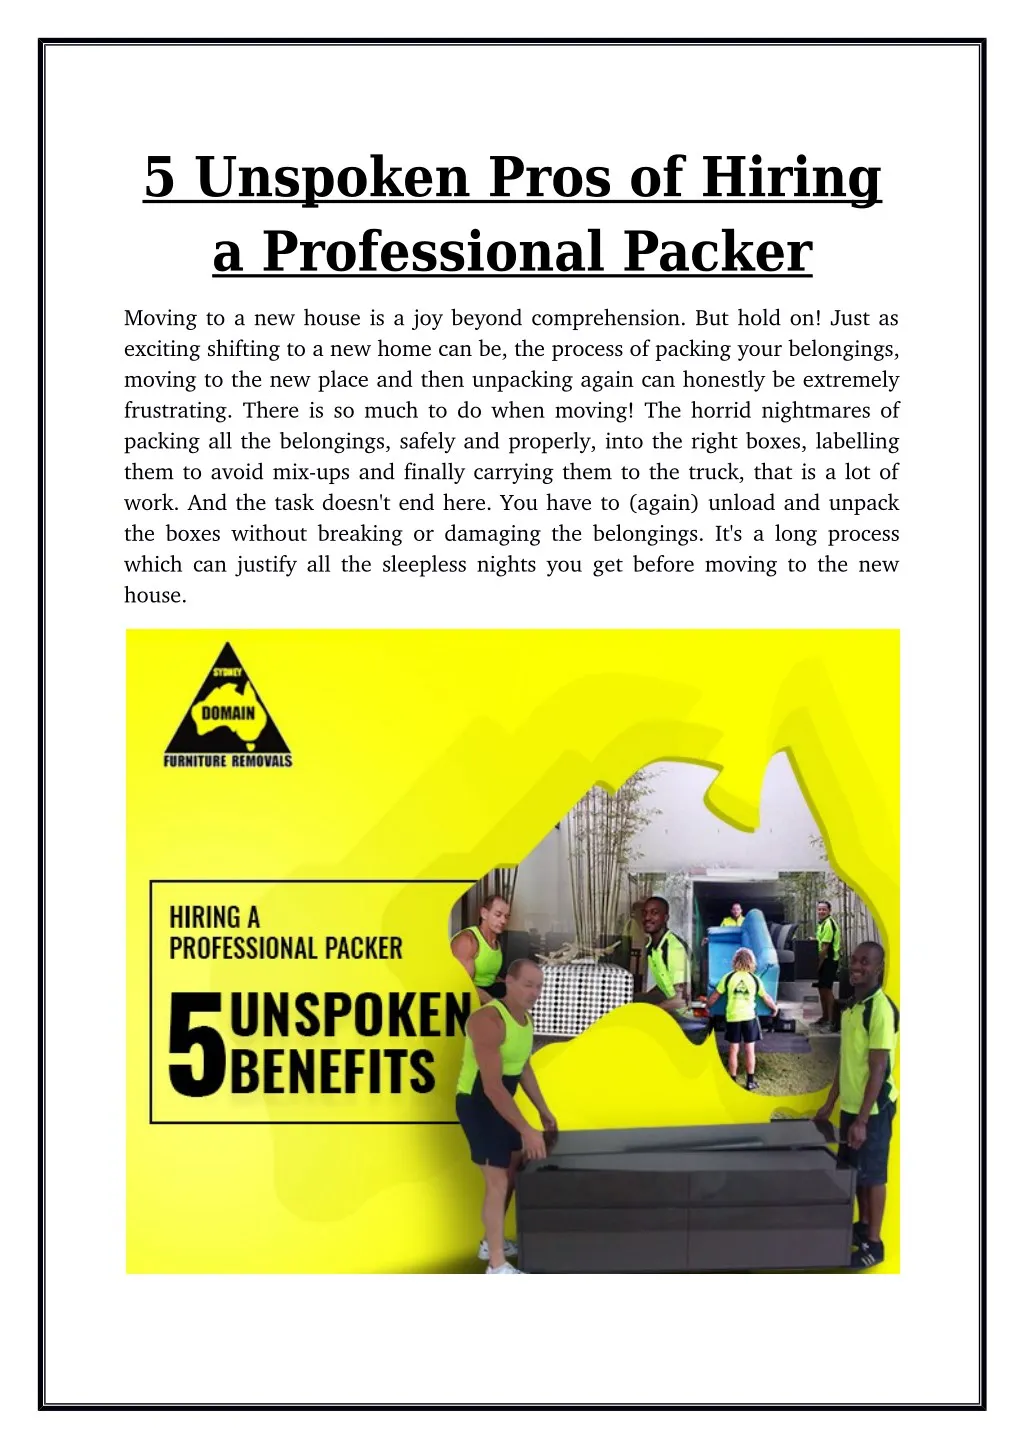 5 unspoken pros of hiring a professional packer